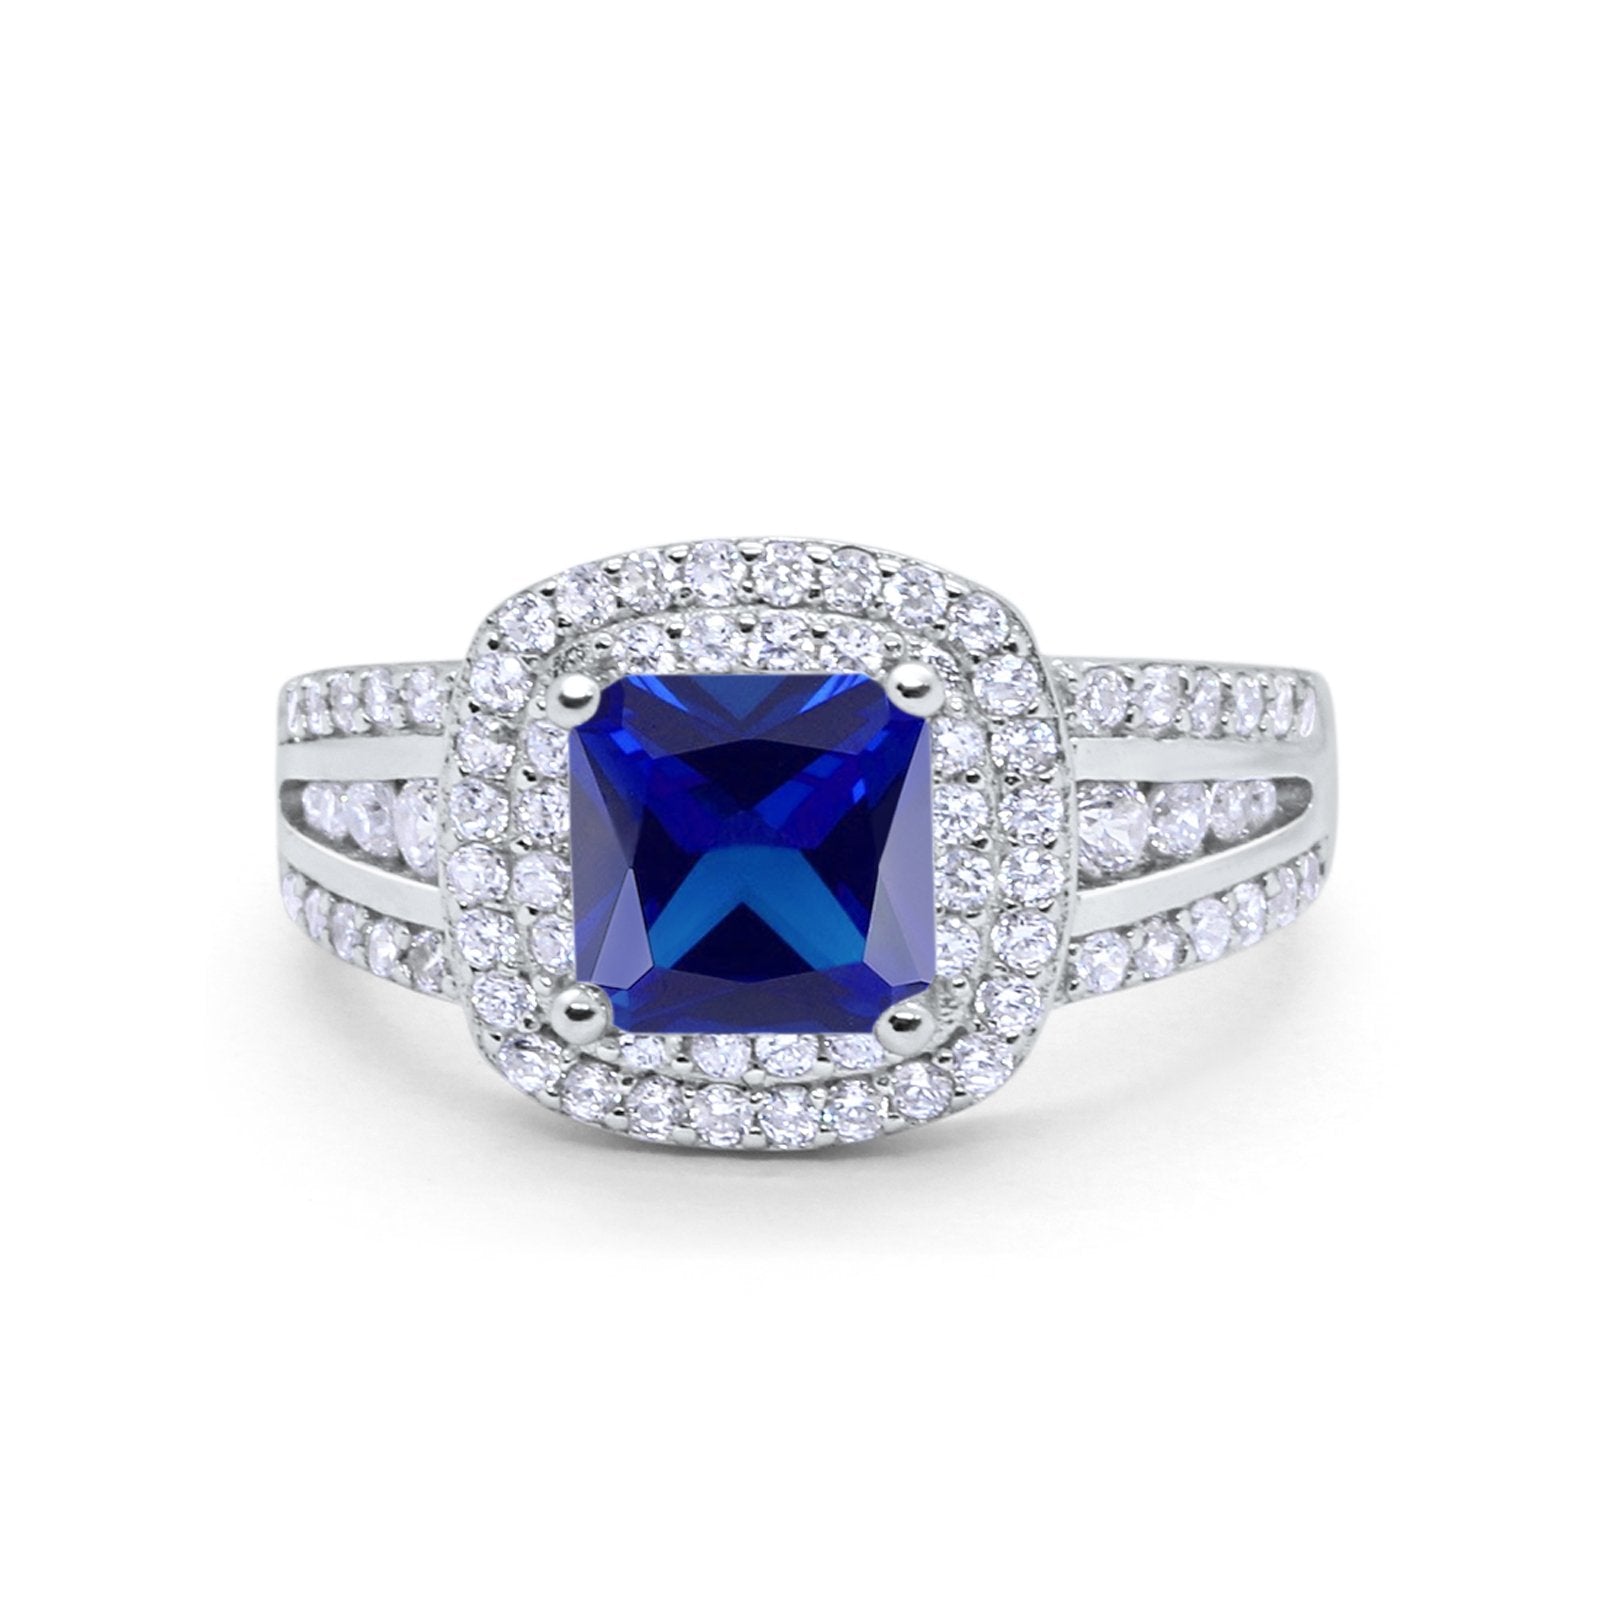 Halo Art Deco Wedding Ring Princess Cut Round Simulated Blue Sapphire CZ 925 Sterling Silver